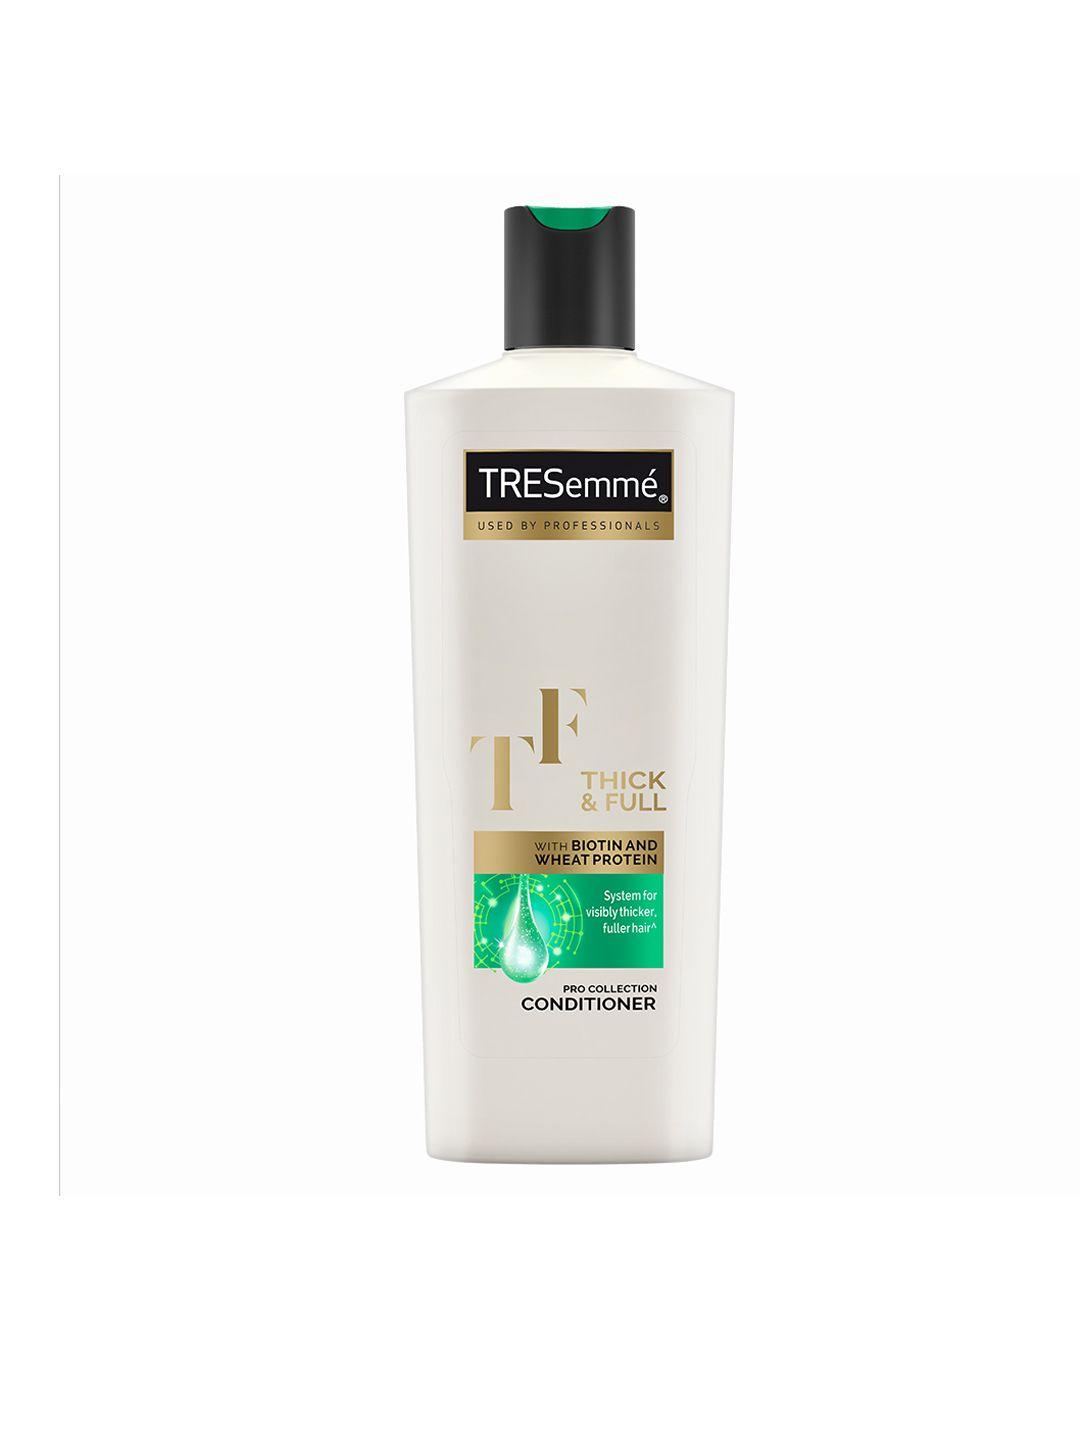 tresemme-thick-&-full-conditioner-with-biotin-&-wheat-protein-for-thick-hair-180-ml